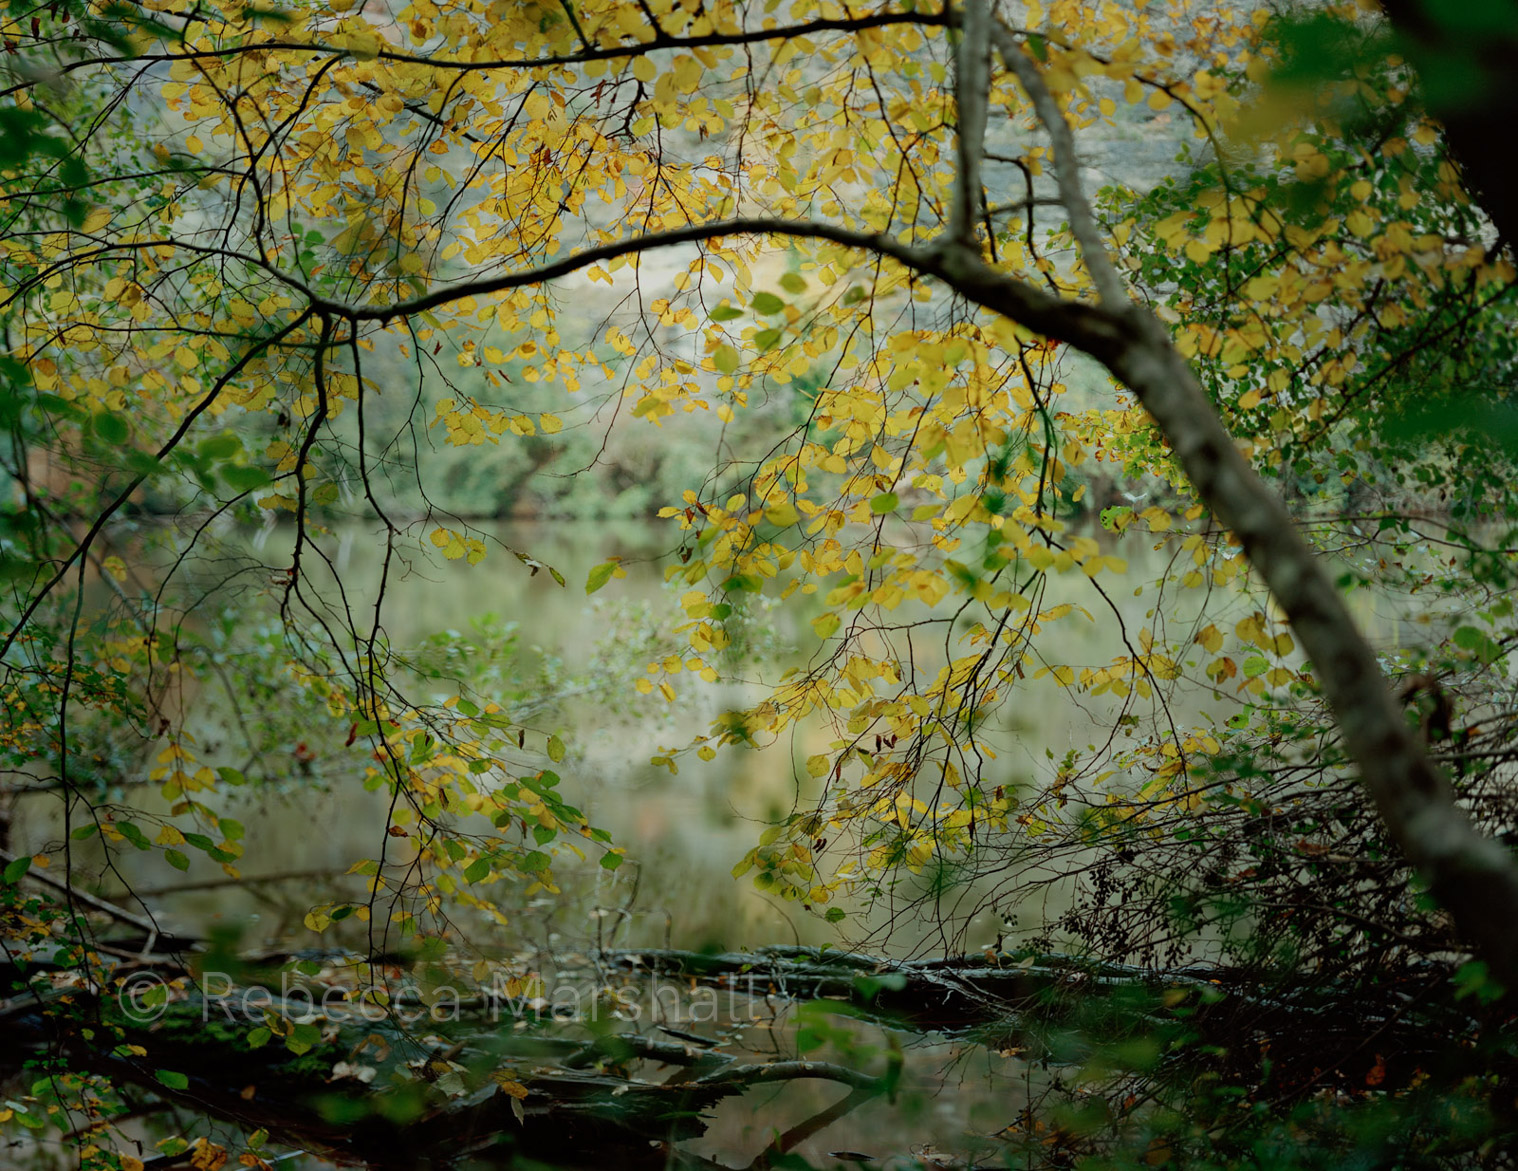 Photograph of a tree with green and yellow leaves overhanging a slow-moving river in the woods